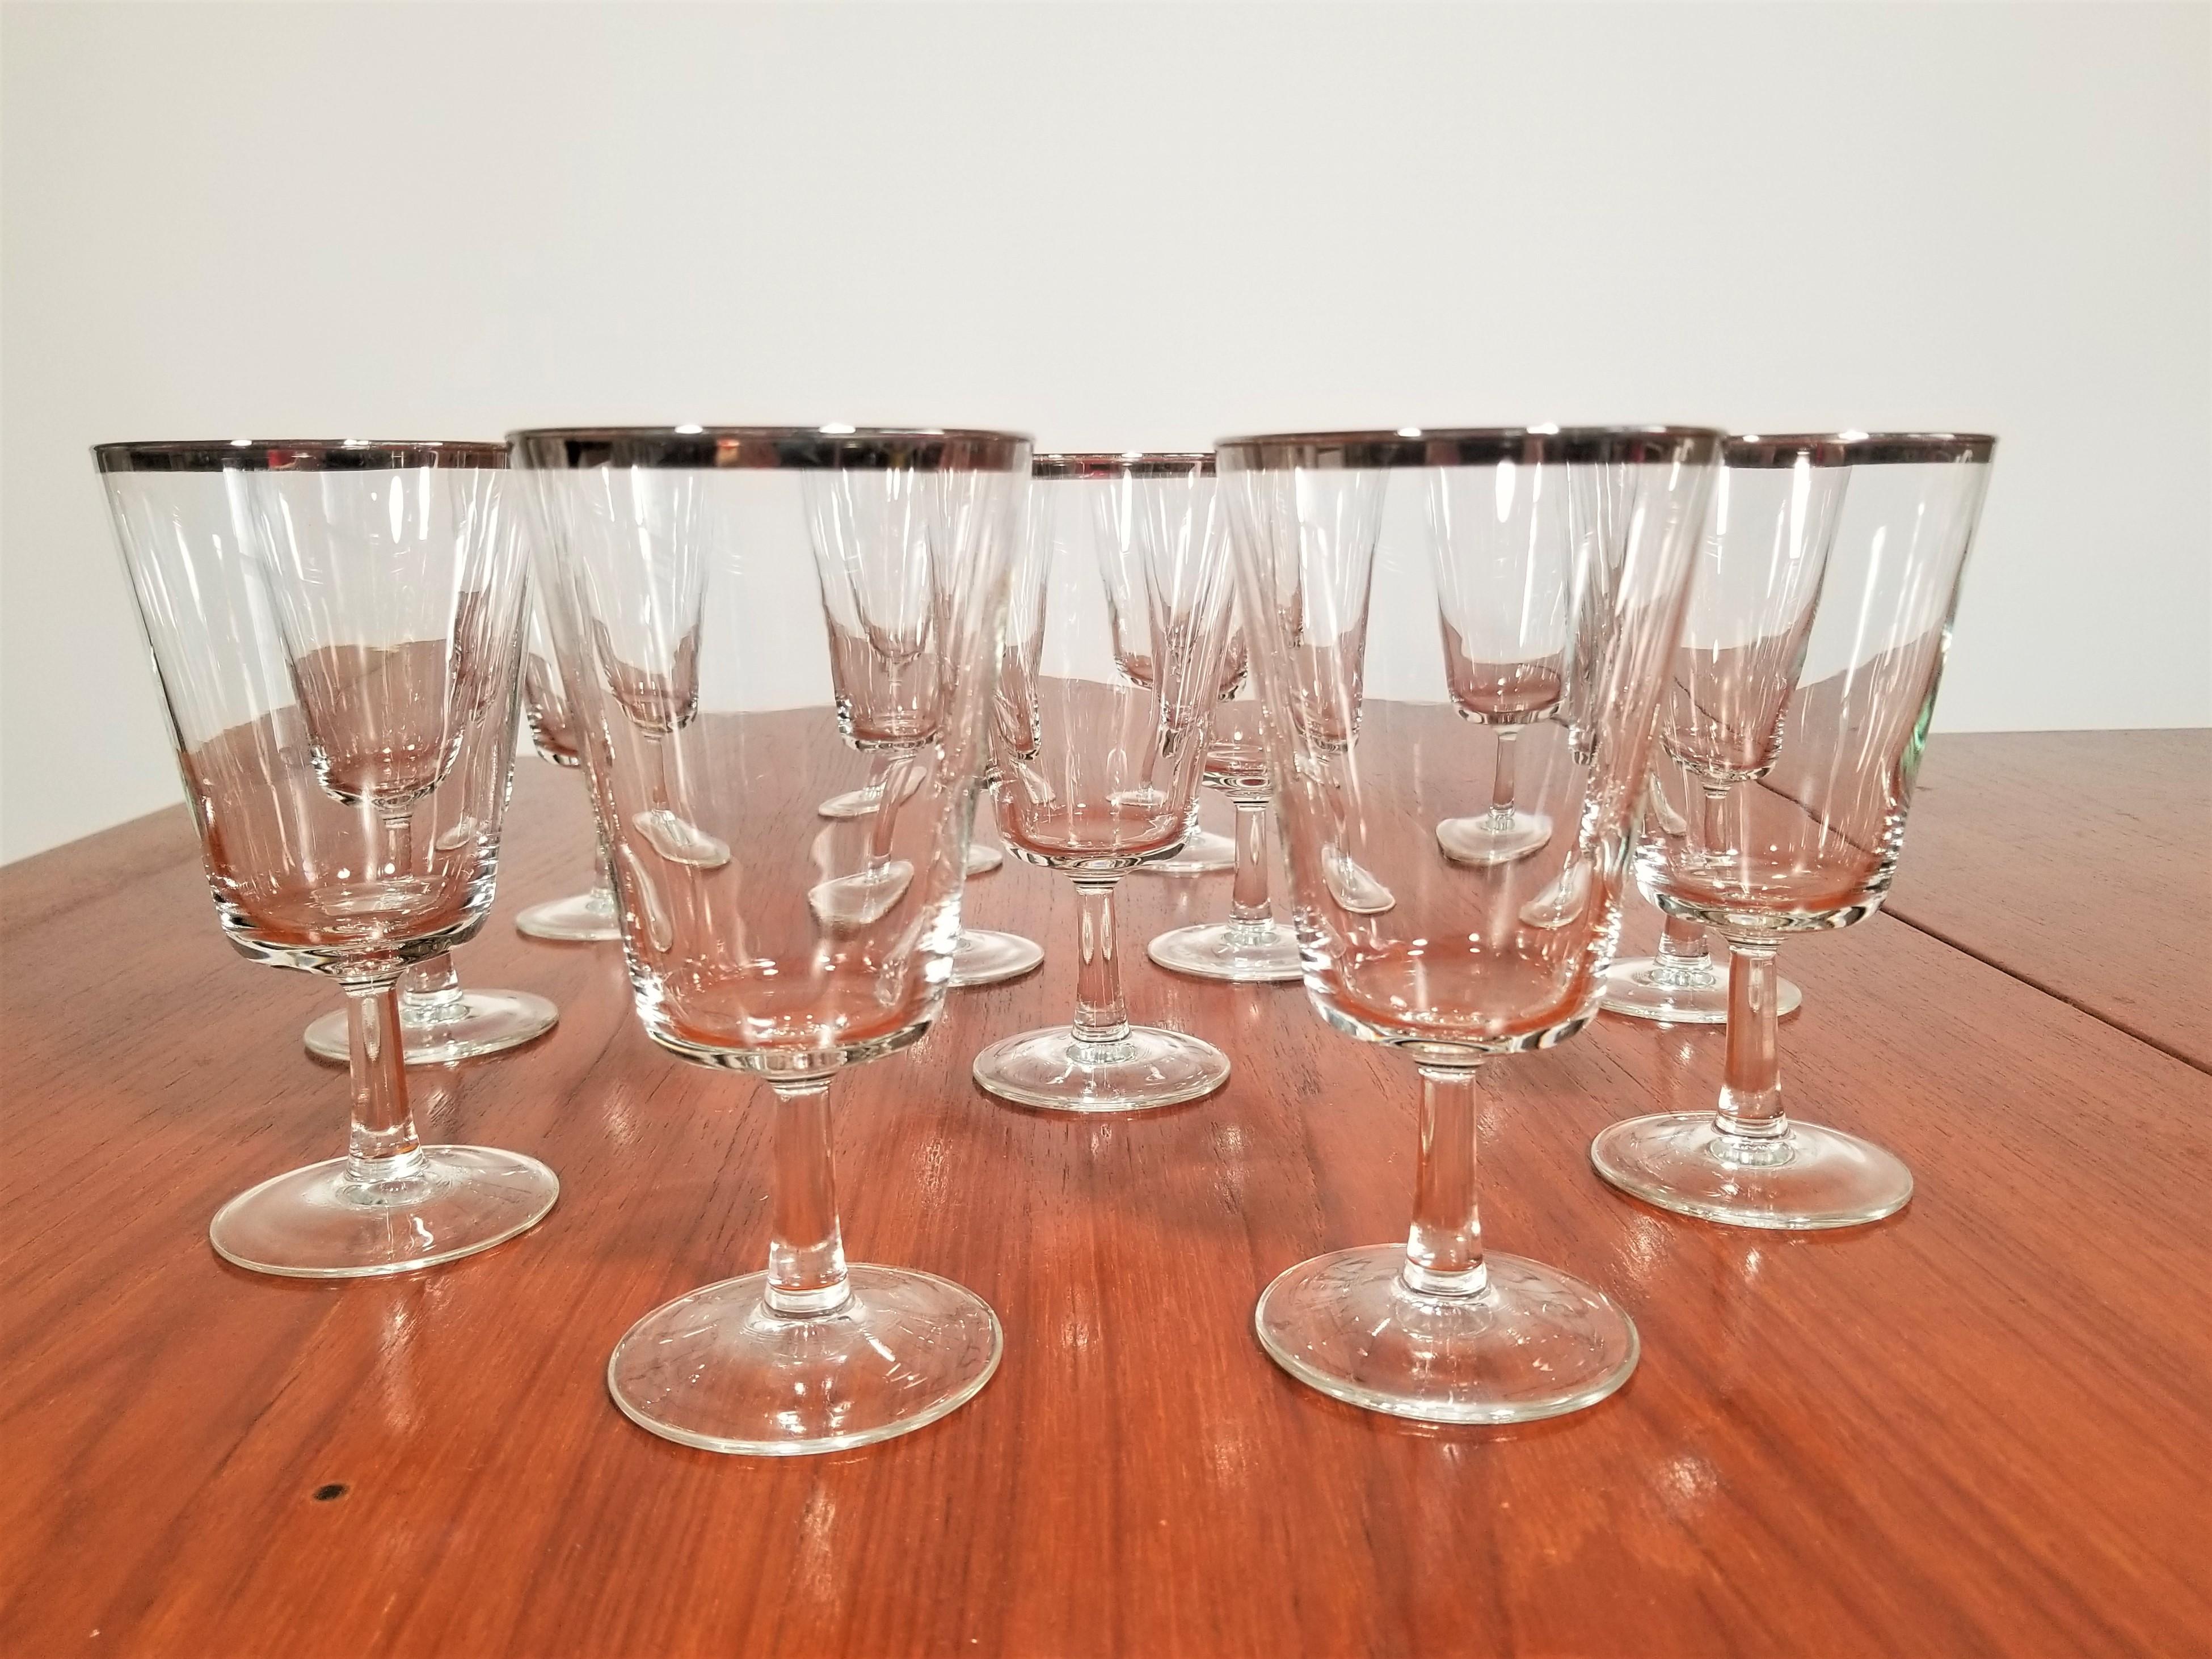 20th Century French Crystal Silver Rimmed Goblets / Stemware 13 Piece Set